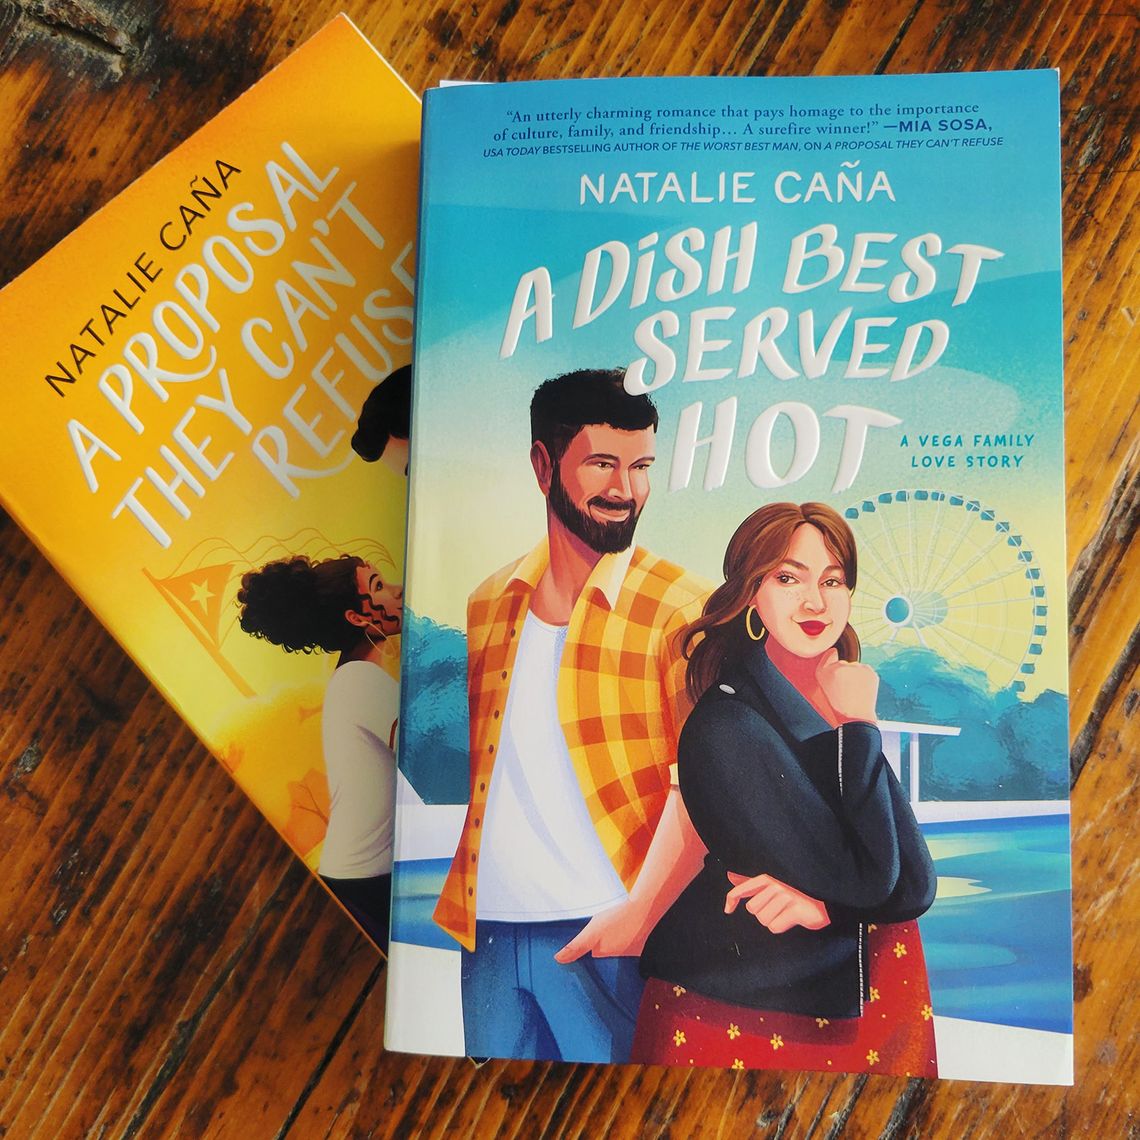 Allsion's Book Review - “A Dish Best Served Hot” by Natalie Caña